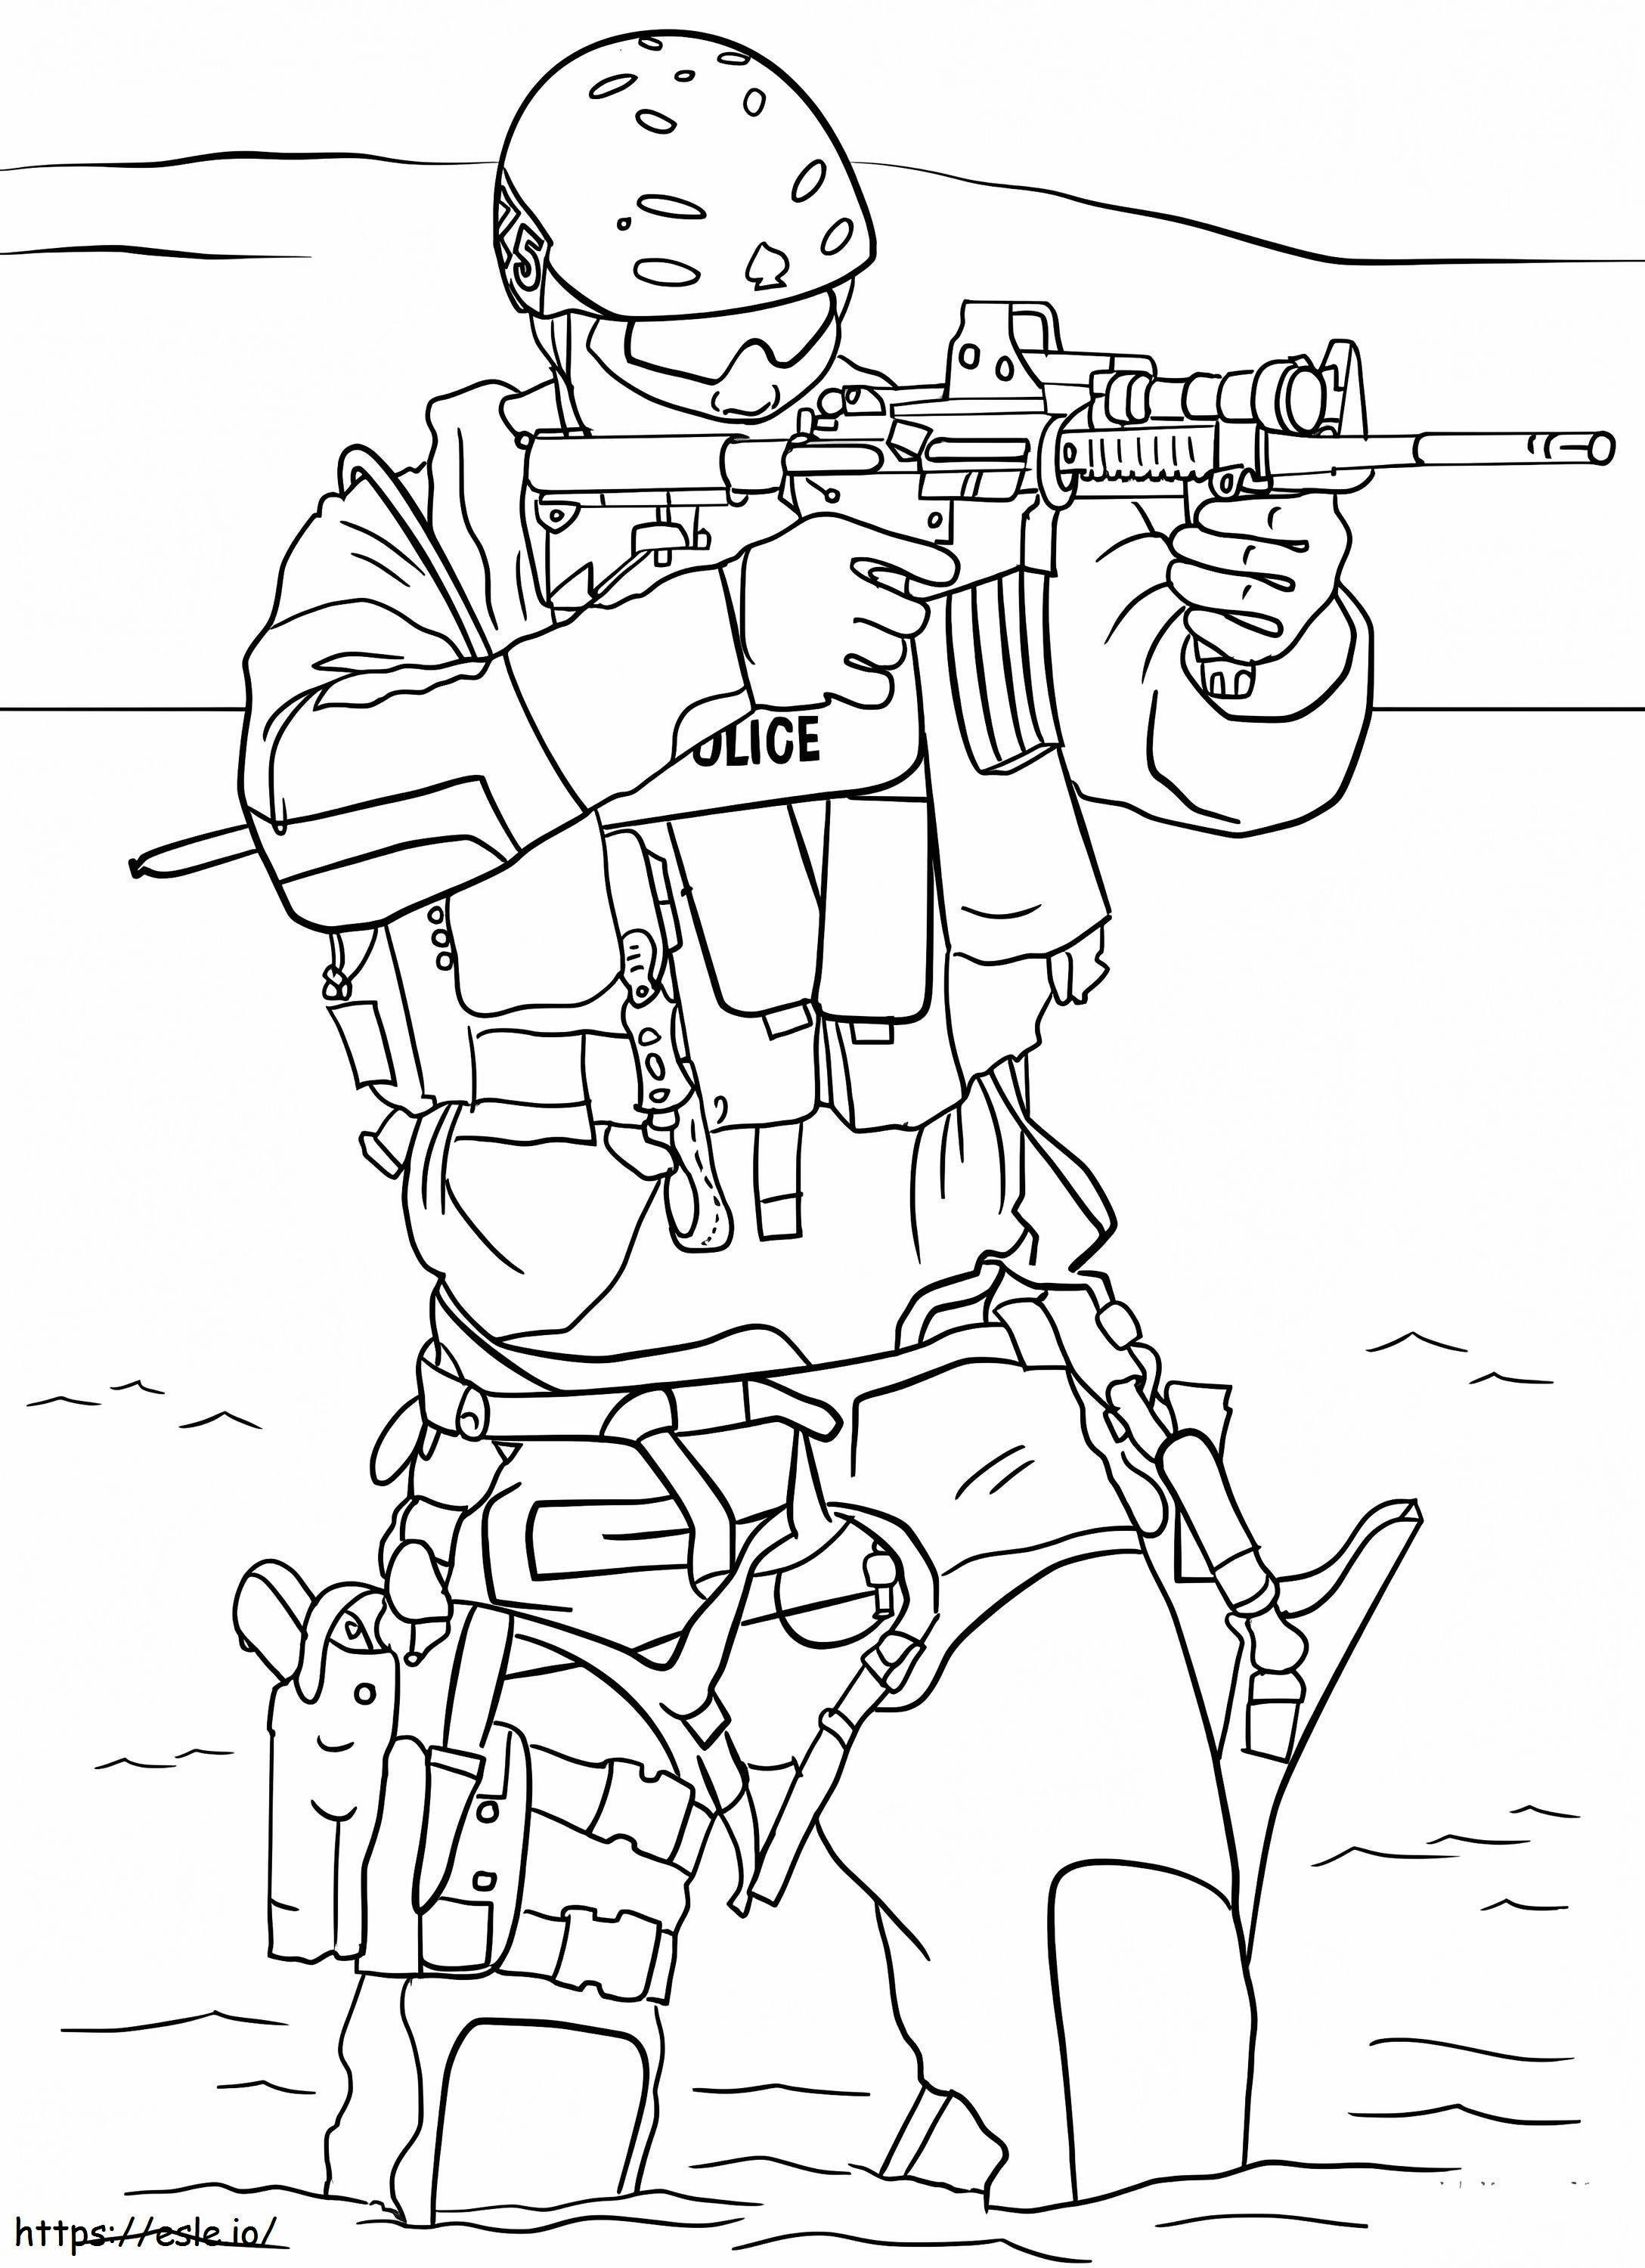 Swat Police With Gun coloring page